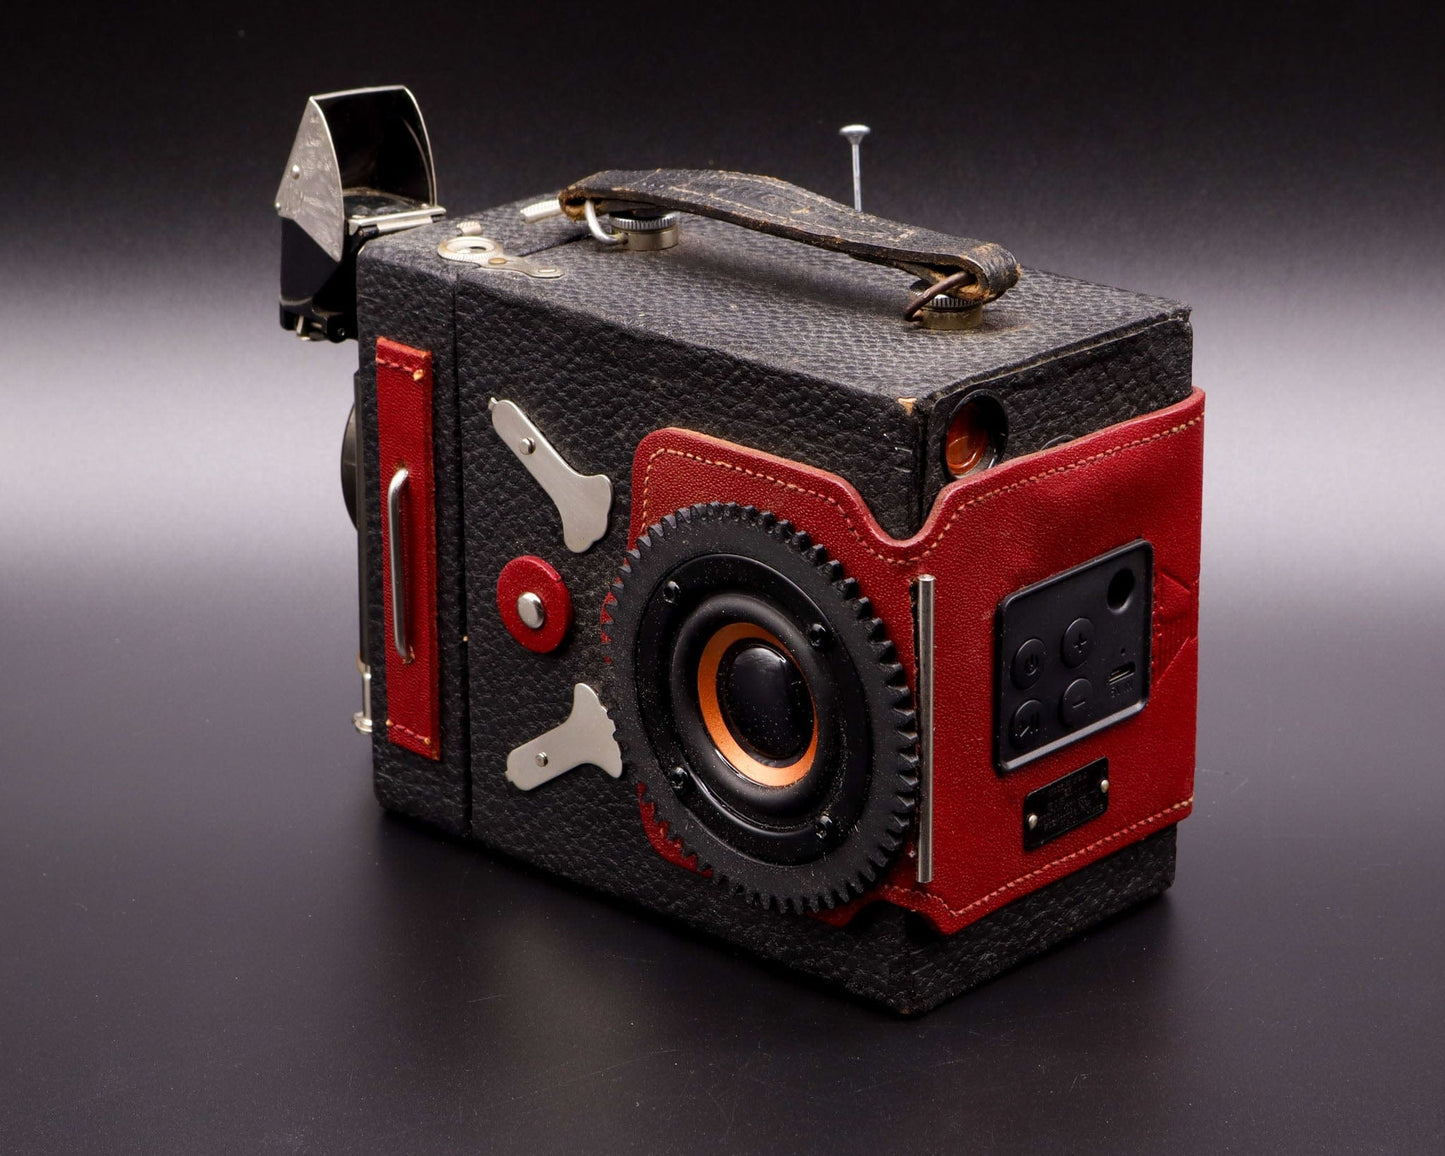 LightAndTimeArt Steampunk Speaker "The Red Baron VI" Steampunk Bluetooth Speaker, Gifts for Geeks, Electronic Audio gadget, signed & numbered artwork